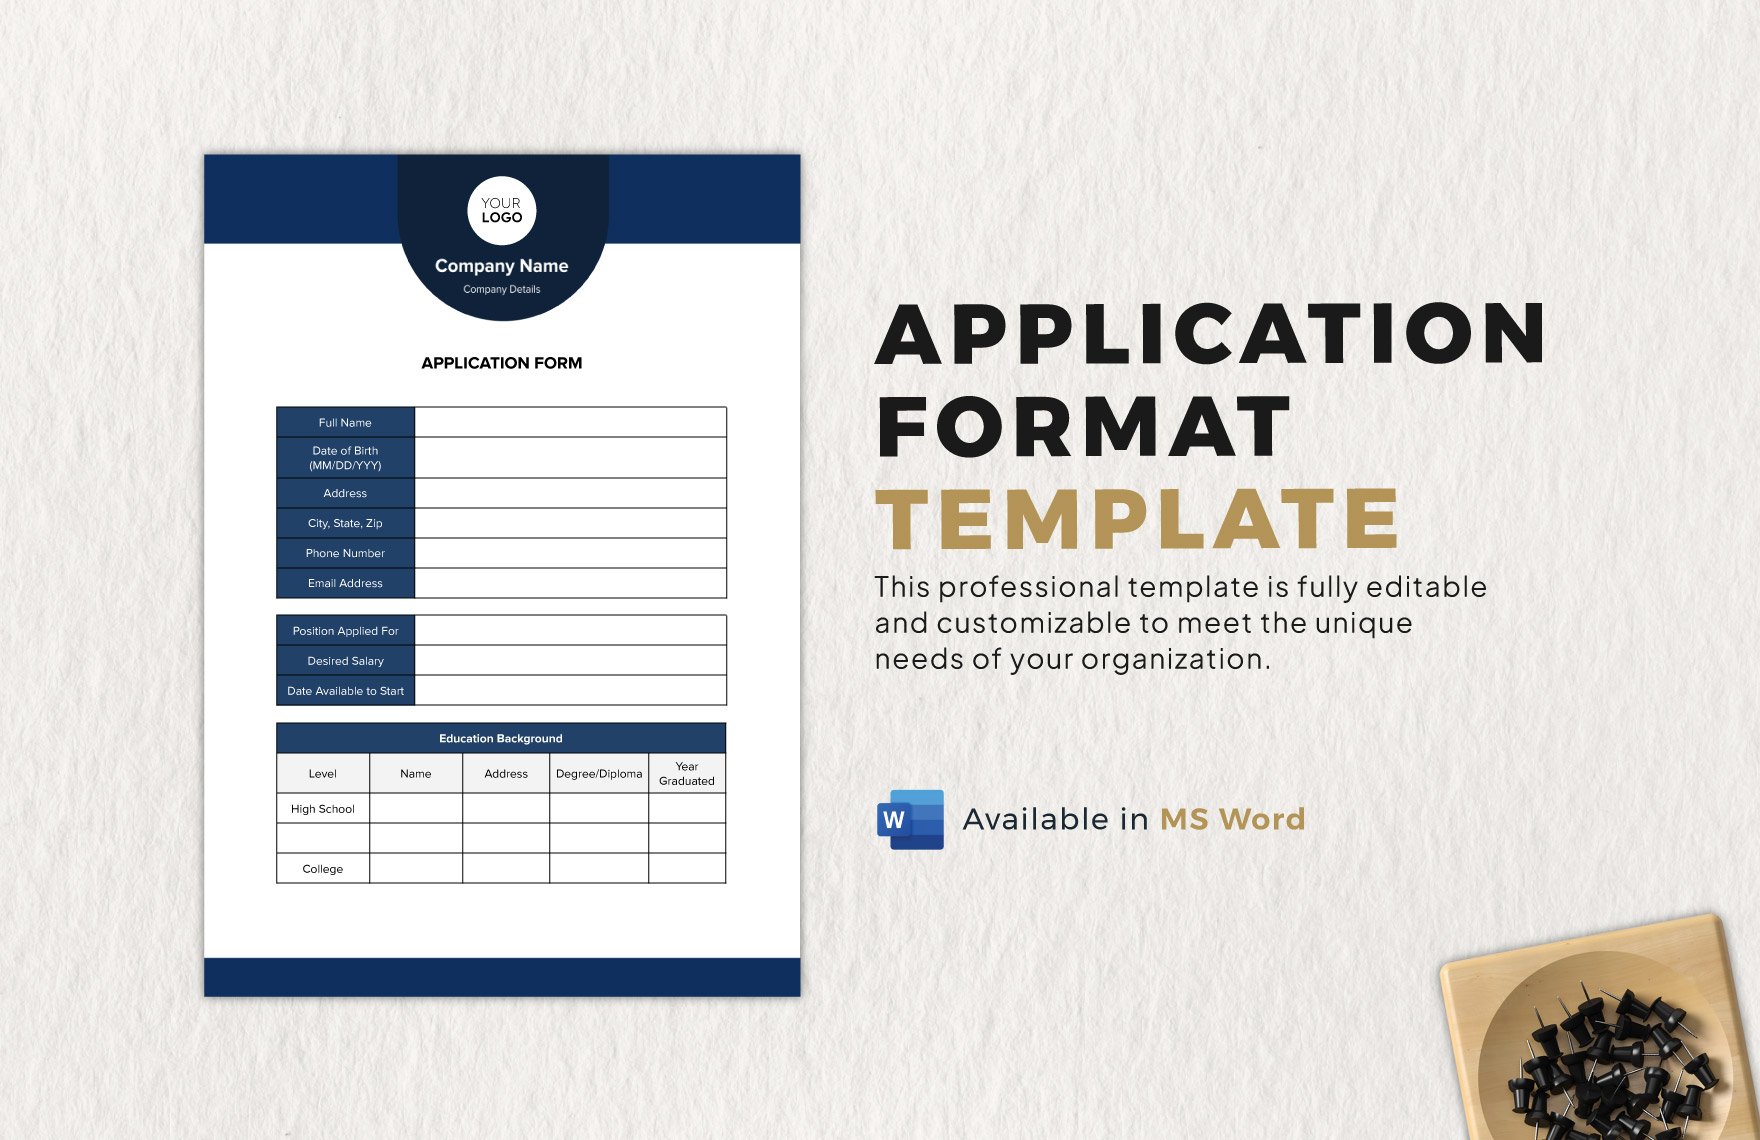 Application Format Template in Word